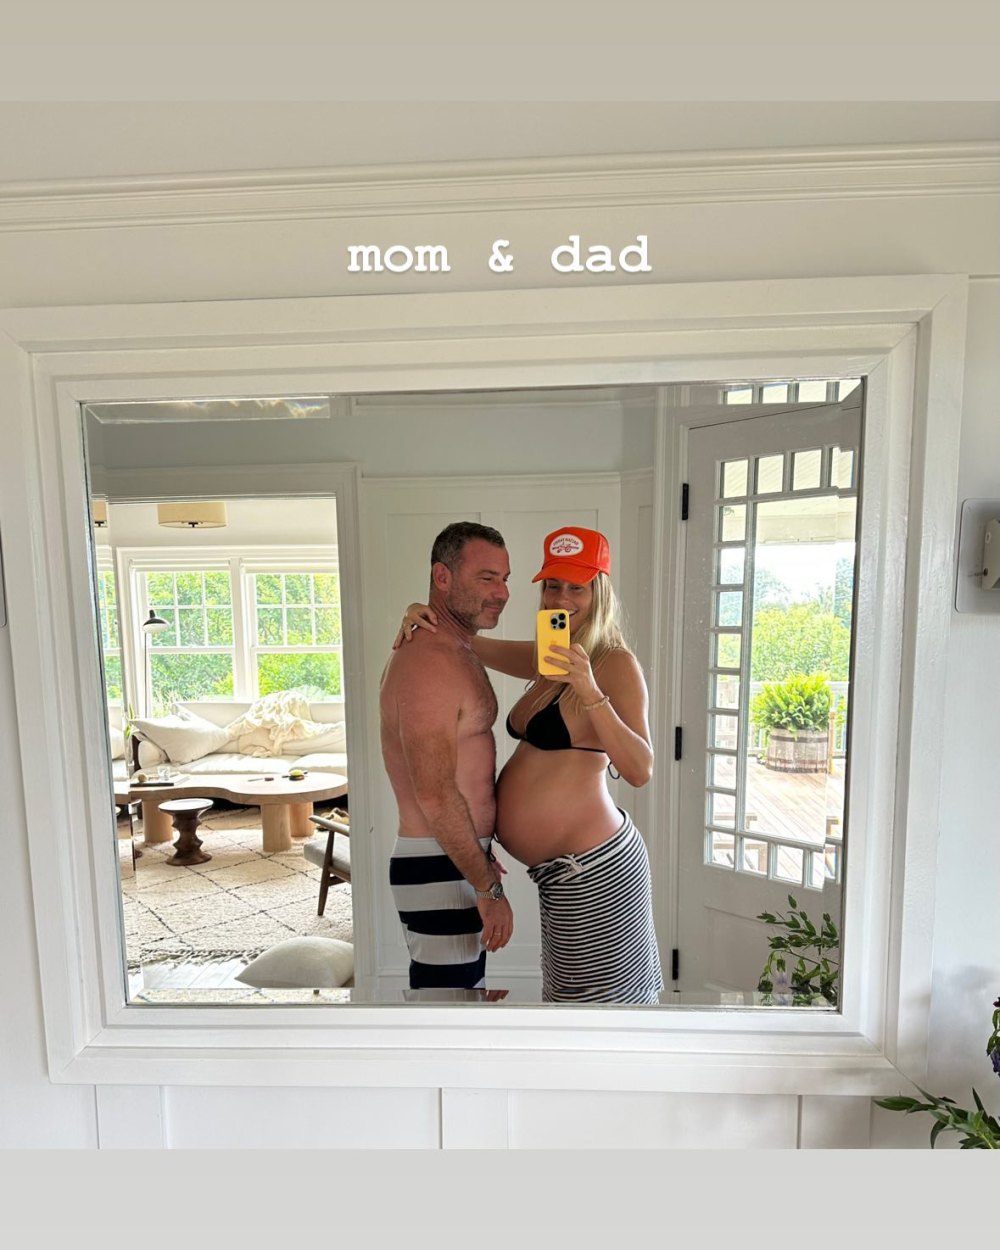 Liev Schreiber Shirtless in Striped Board Shorts Smiles in Mirror Selfie with Pregnant Taylor Neisen wearing a Black Bikini top, Orange Hat, and Striped Skirt holding Yellow Phone